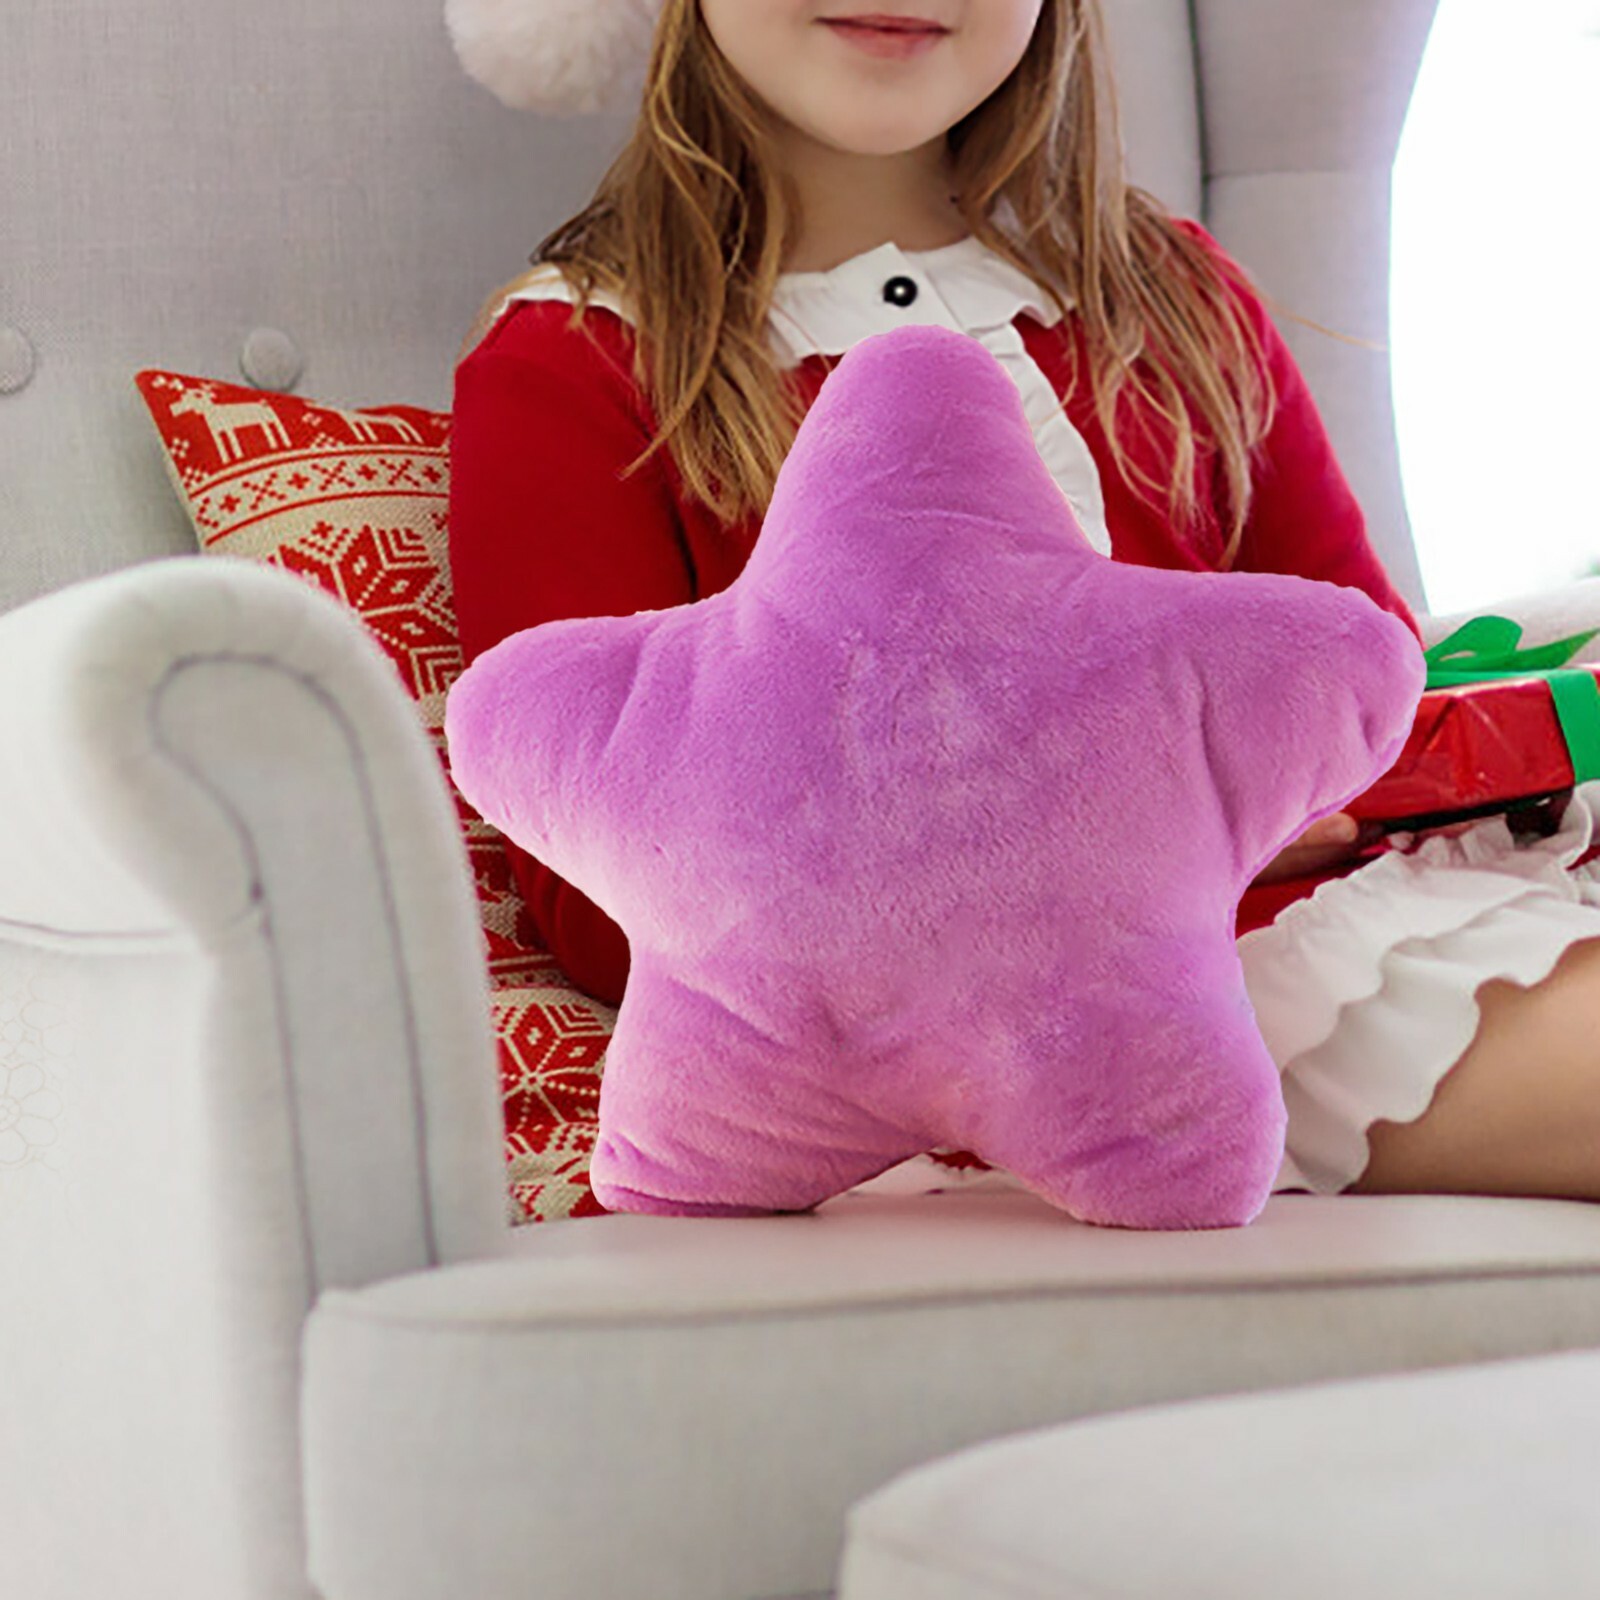 CozyPlushies Cozy Five-Pointed Star Plush Pillow - Perfect Gift for Kids & Home Decor